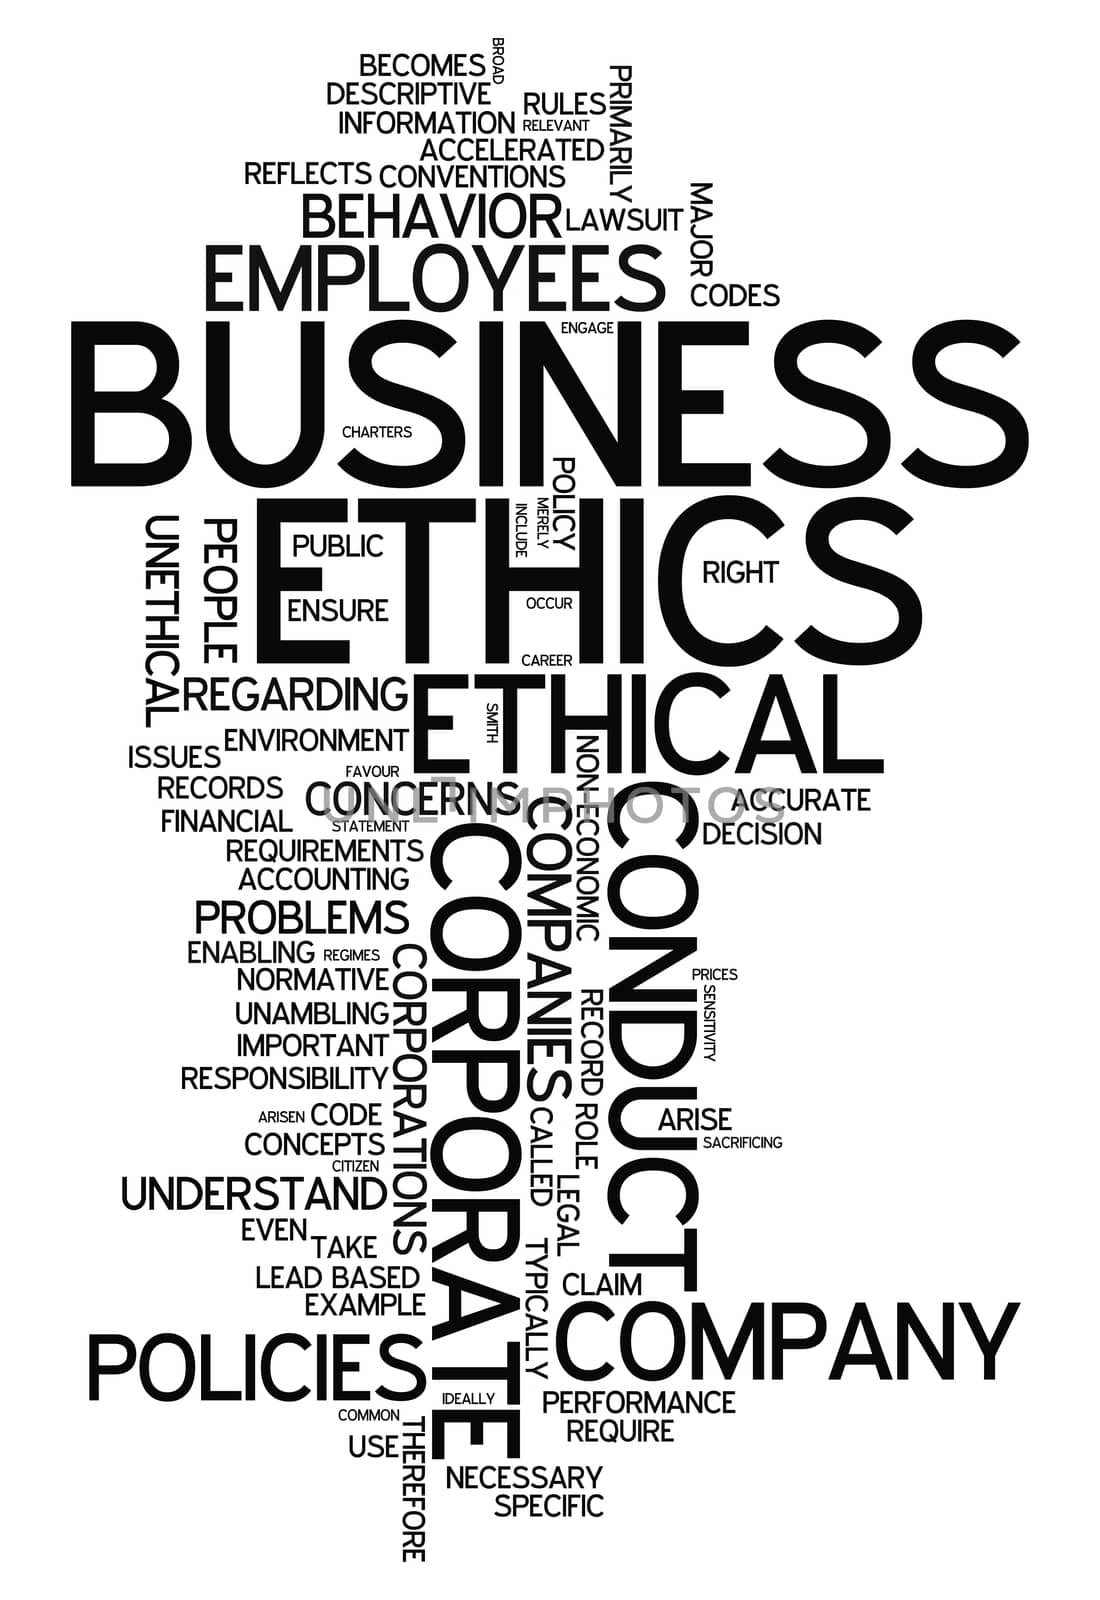 Word Cloud with Business Ethics related tags